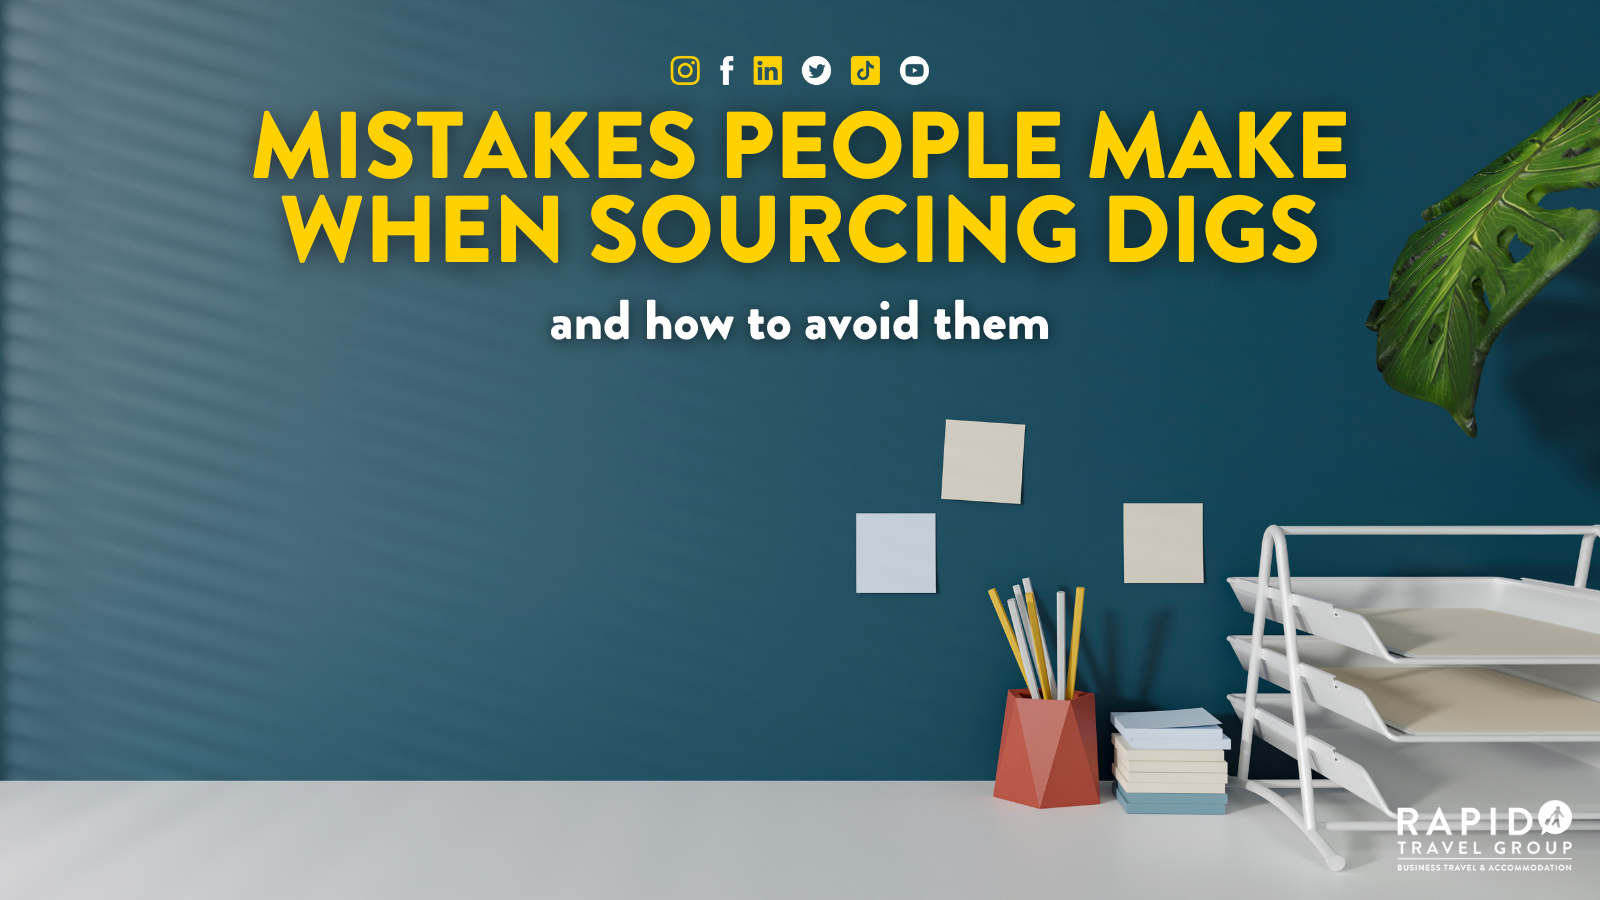 Mistakes people make when sourcing digs and how to avoid them